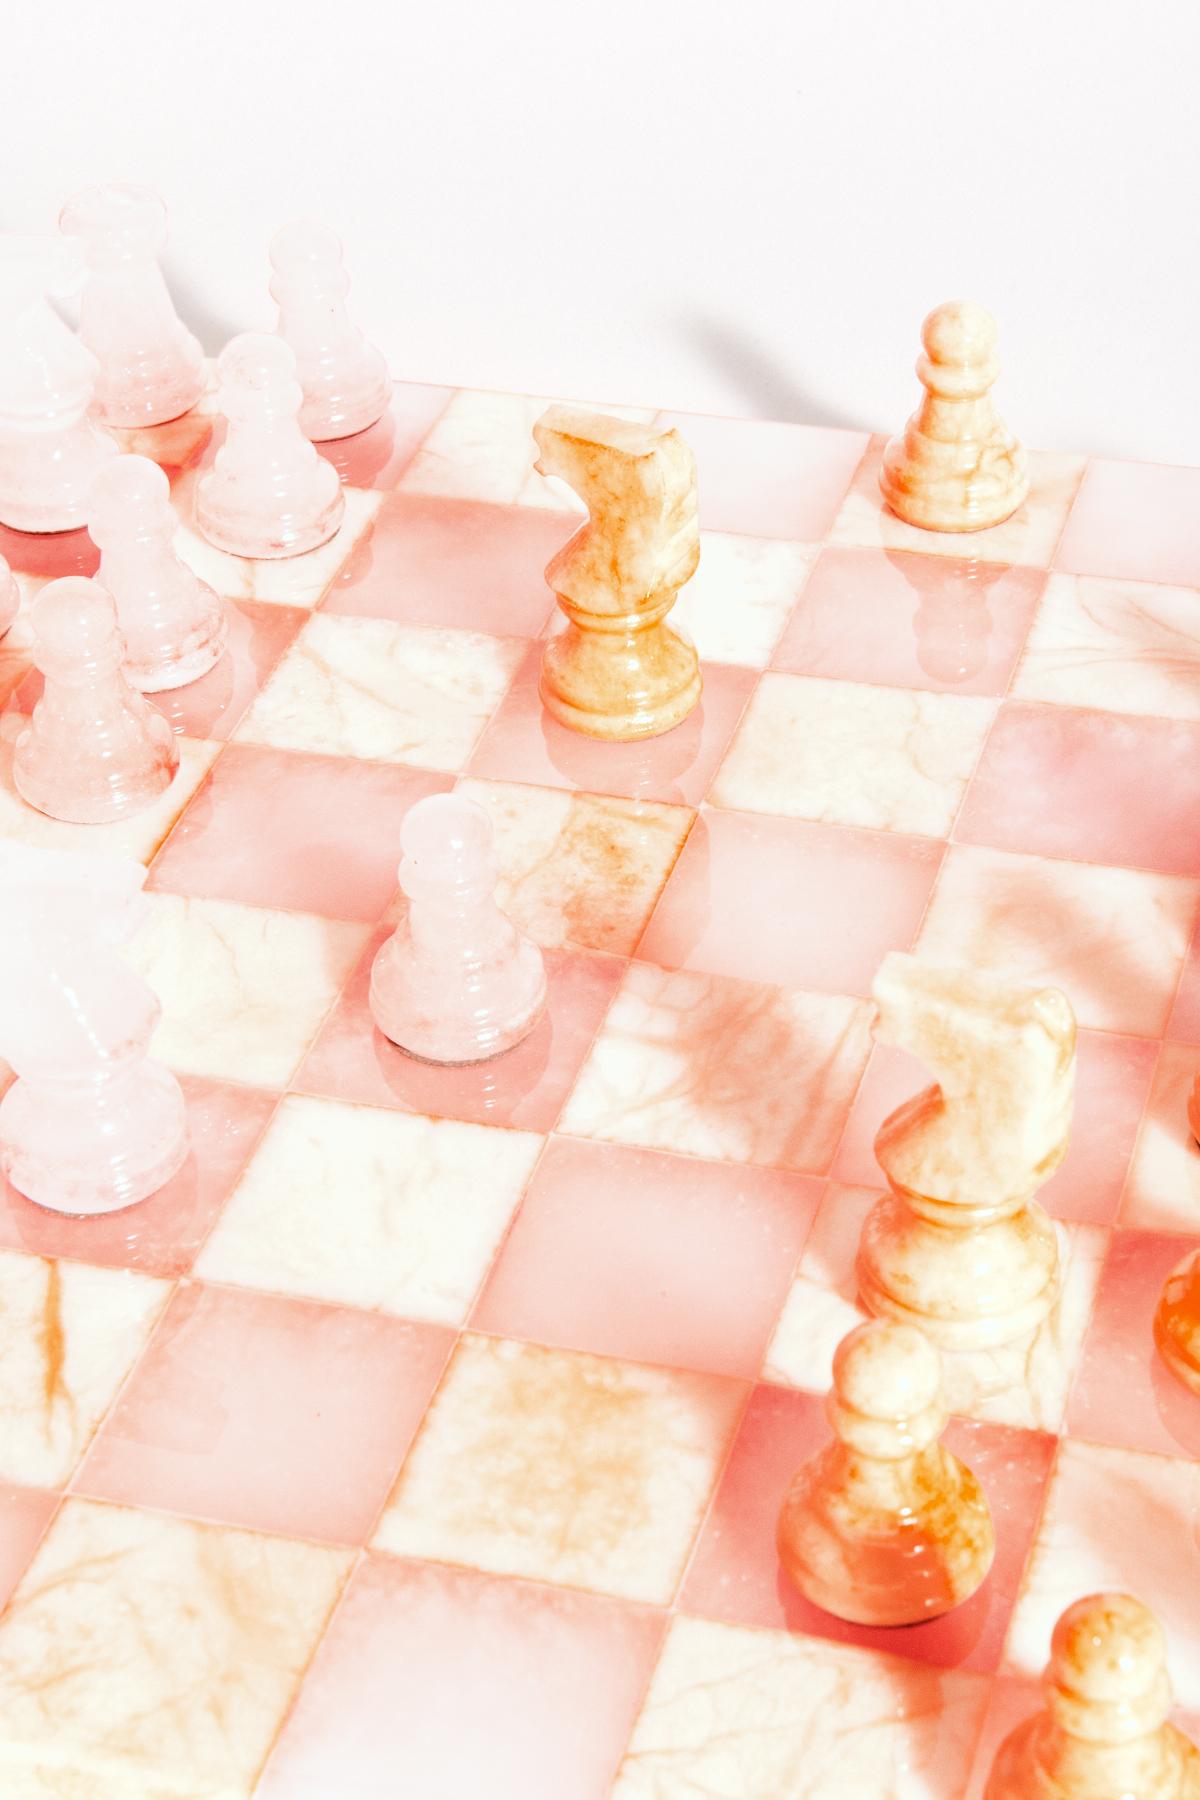 Italian Pale Pink/Peach Large Alabaster Chess Set For Sale 2